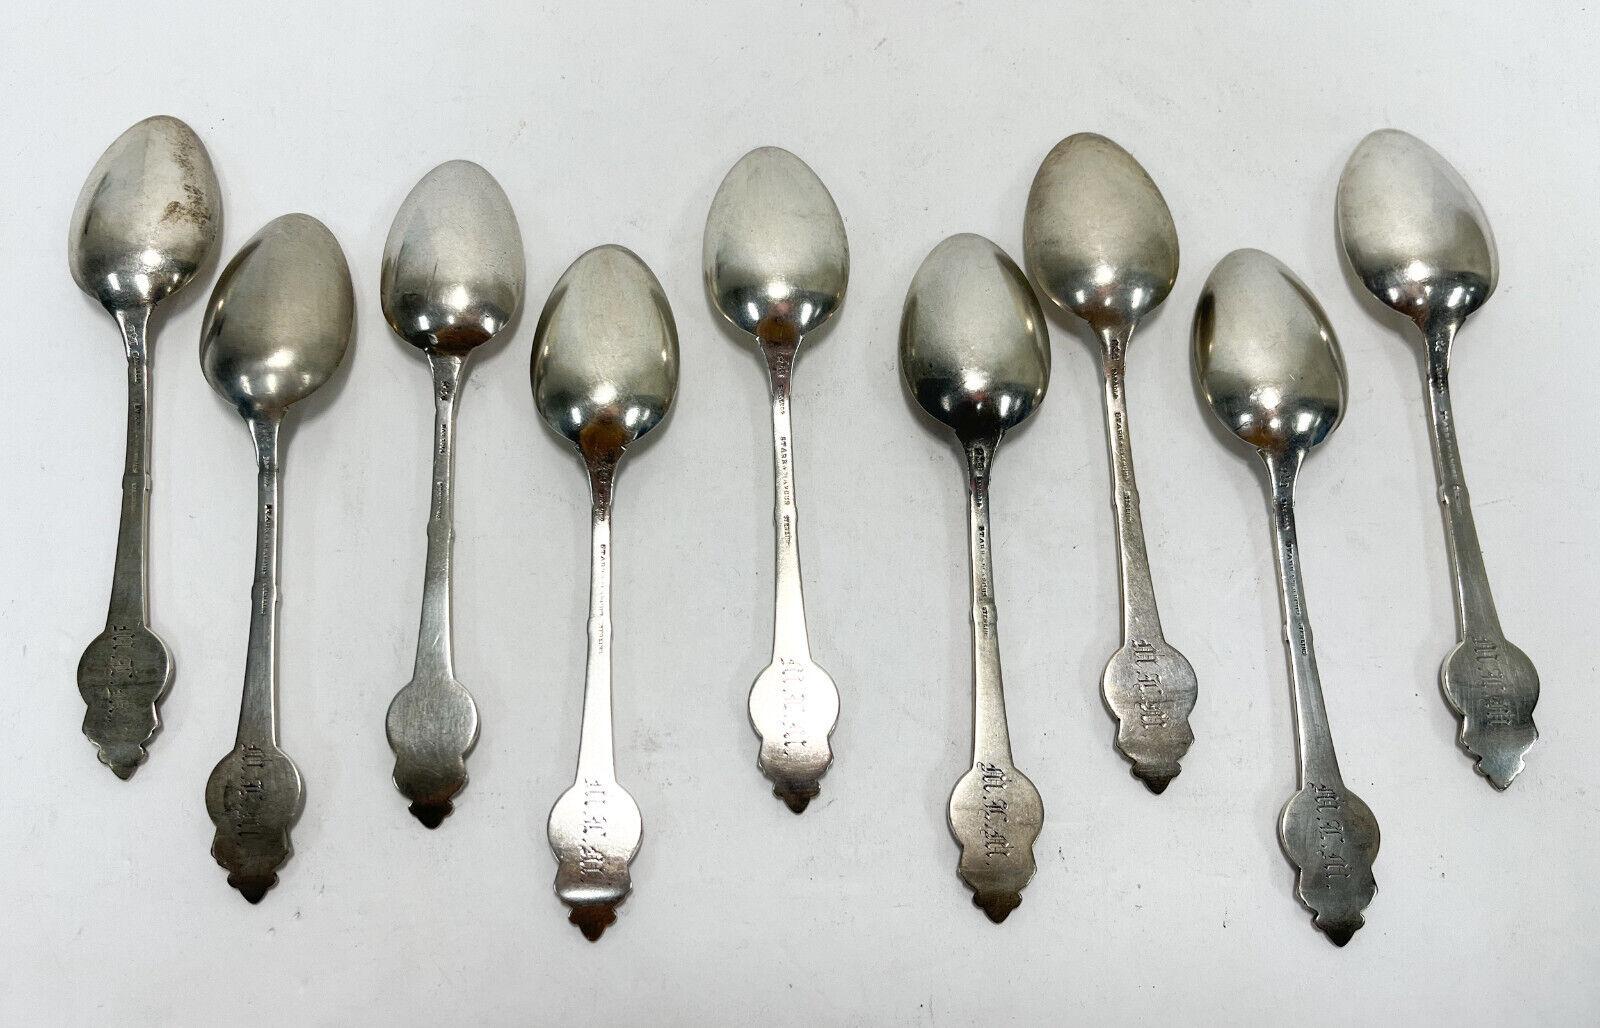 9 Gorham Sterling Silver Medallion Teaspoons, Late 19th Century  In Good Condition For Sale In Gardena, CA